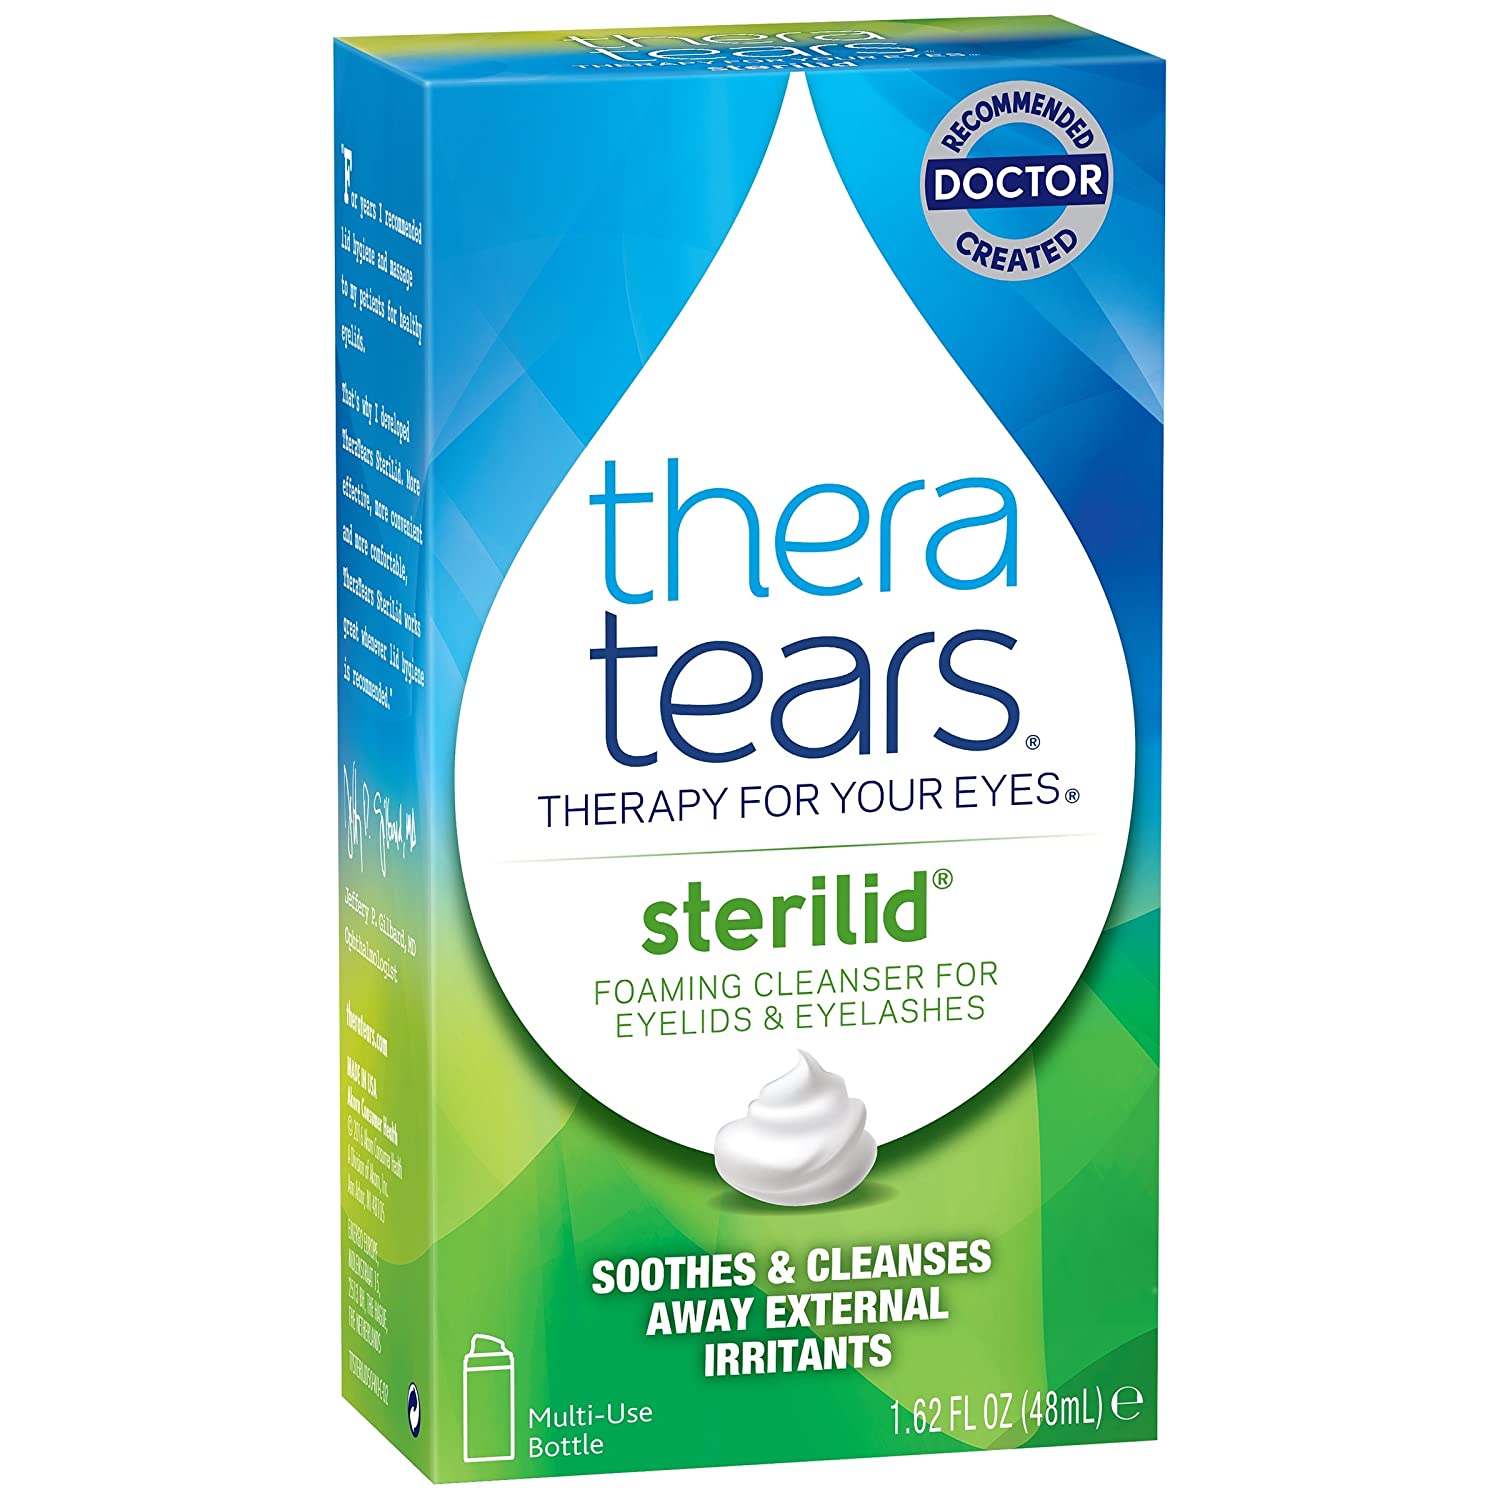 Eyes cleaning. Thera tears. Thera tears prezervatif. Great clean one. Thera face.